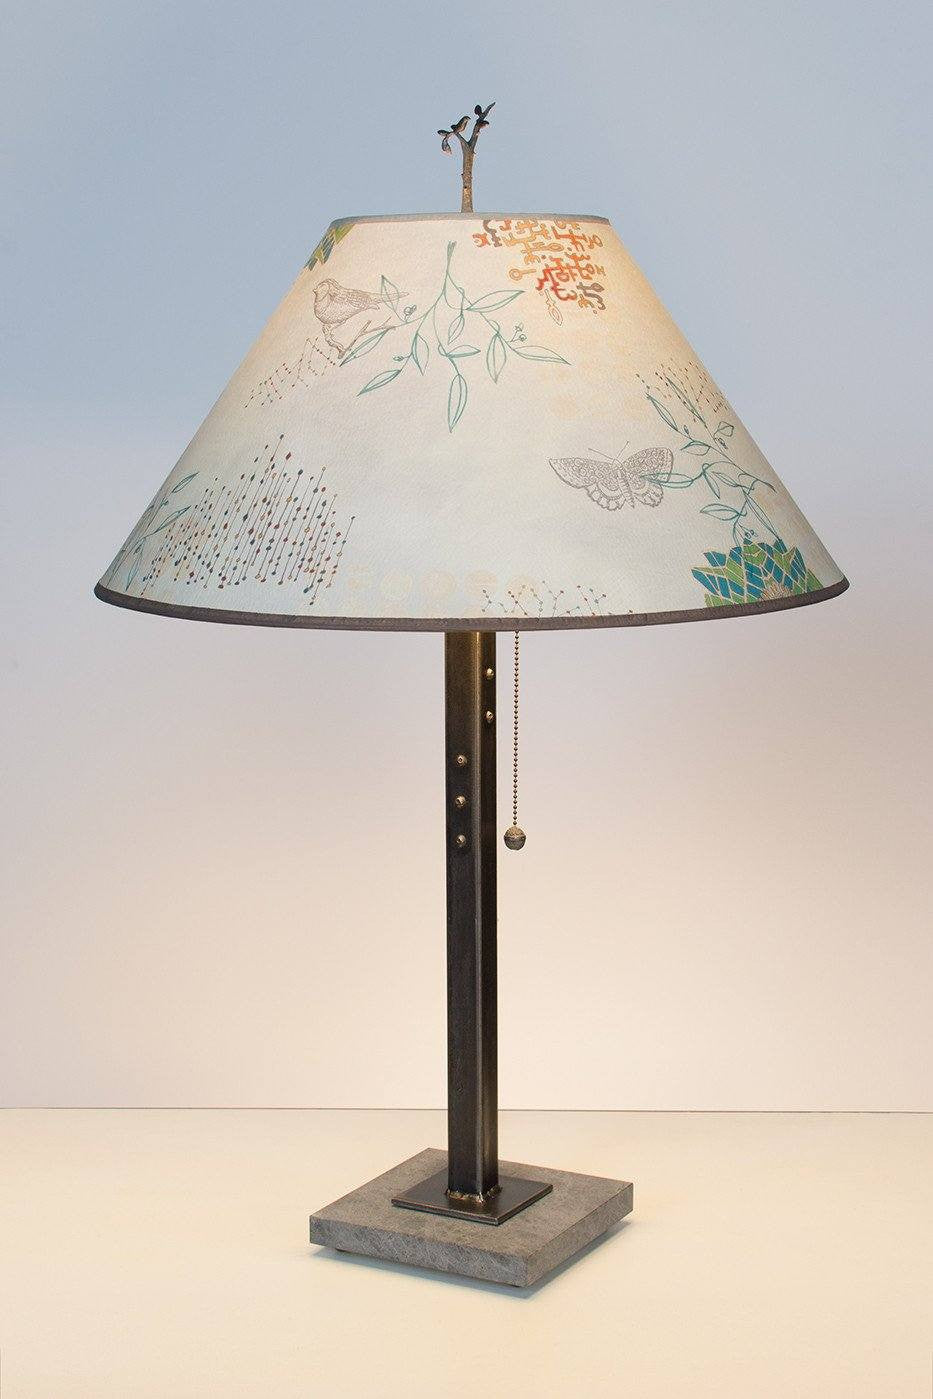 Steel Table Lamp with Large Conical Shade in Ecru Journey